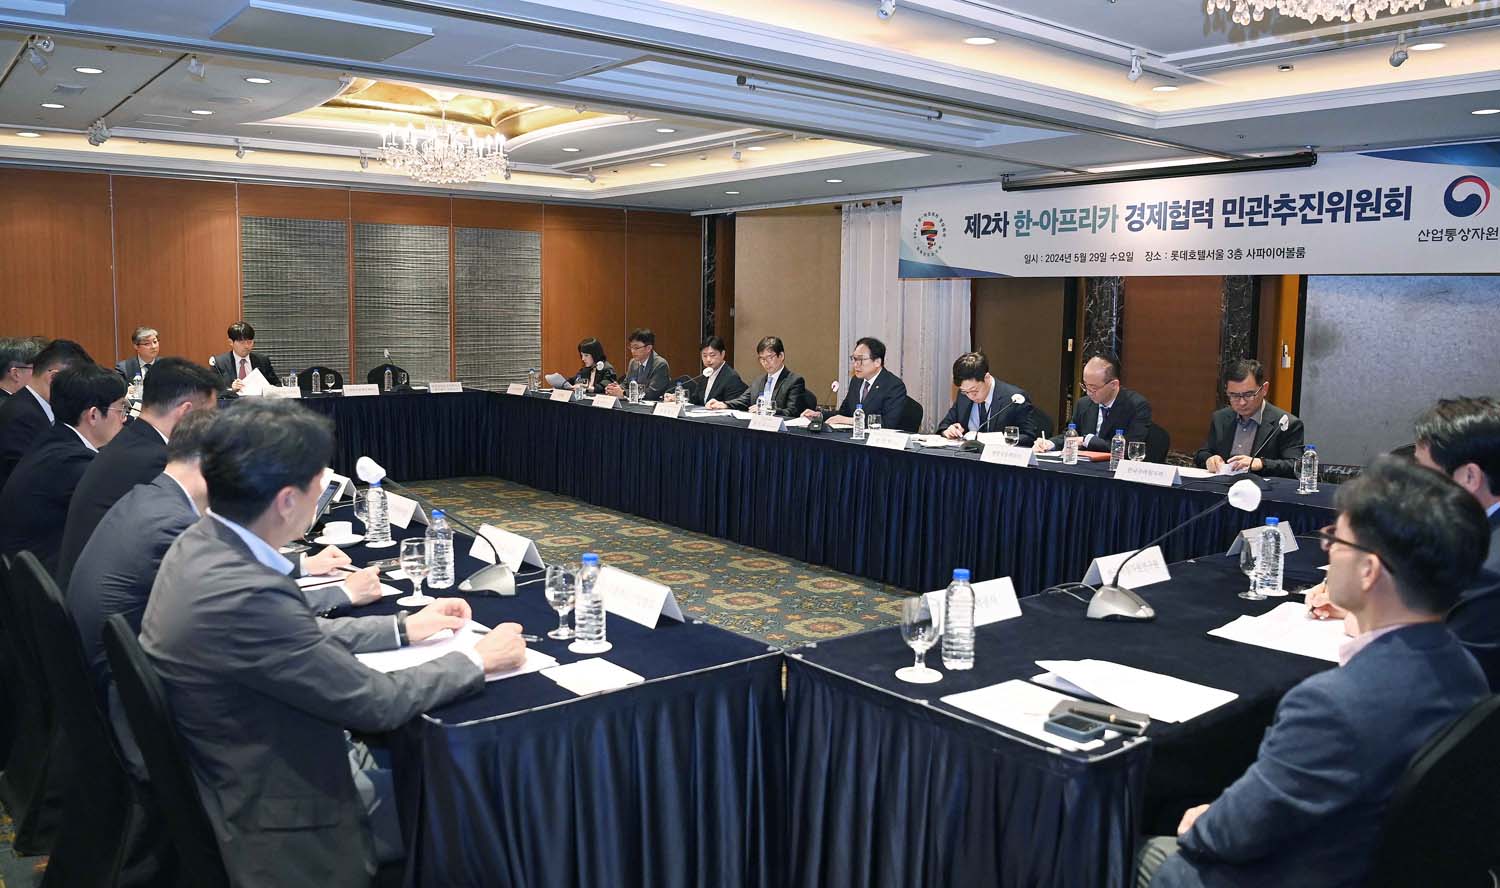 2nd meeting of the Public-Private Committee for Korea-Africa Economic Cooperation